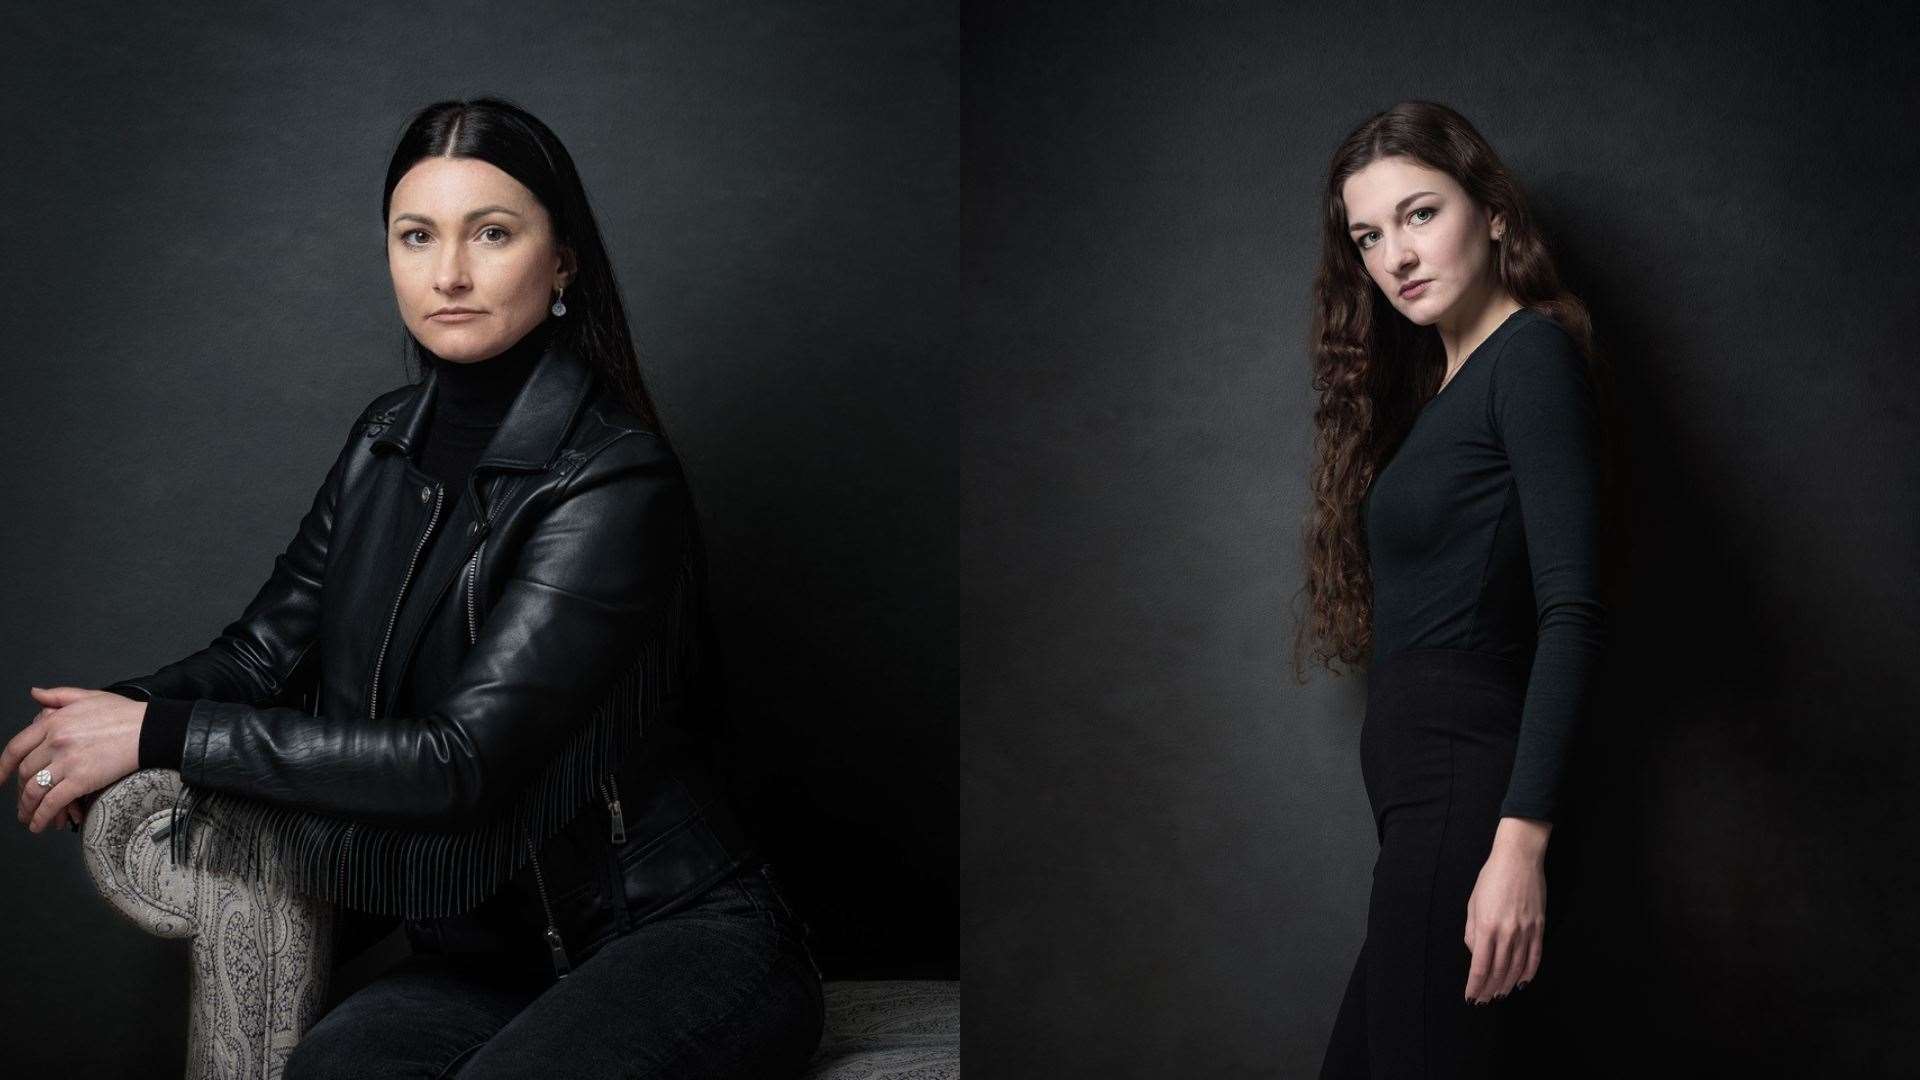 Liudmila Sergiienko (left) and Alina Onishchenko (right), two other subjects featured in the exhibition (Ean Flanders/PA)